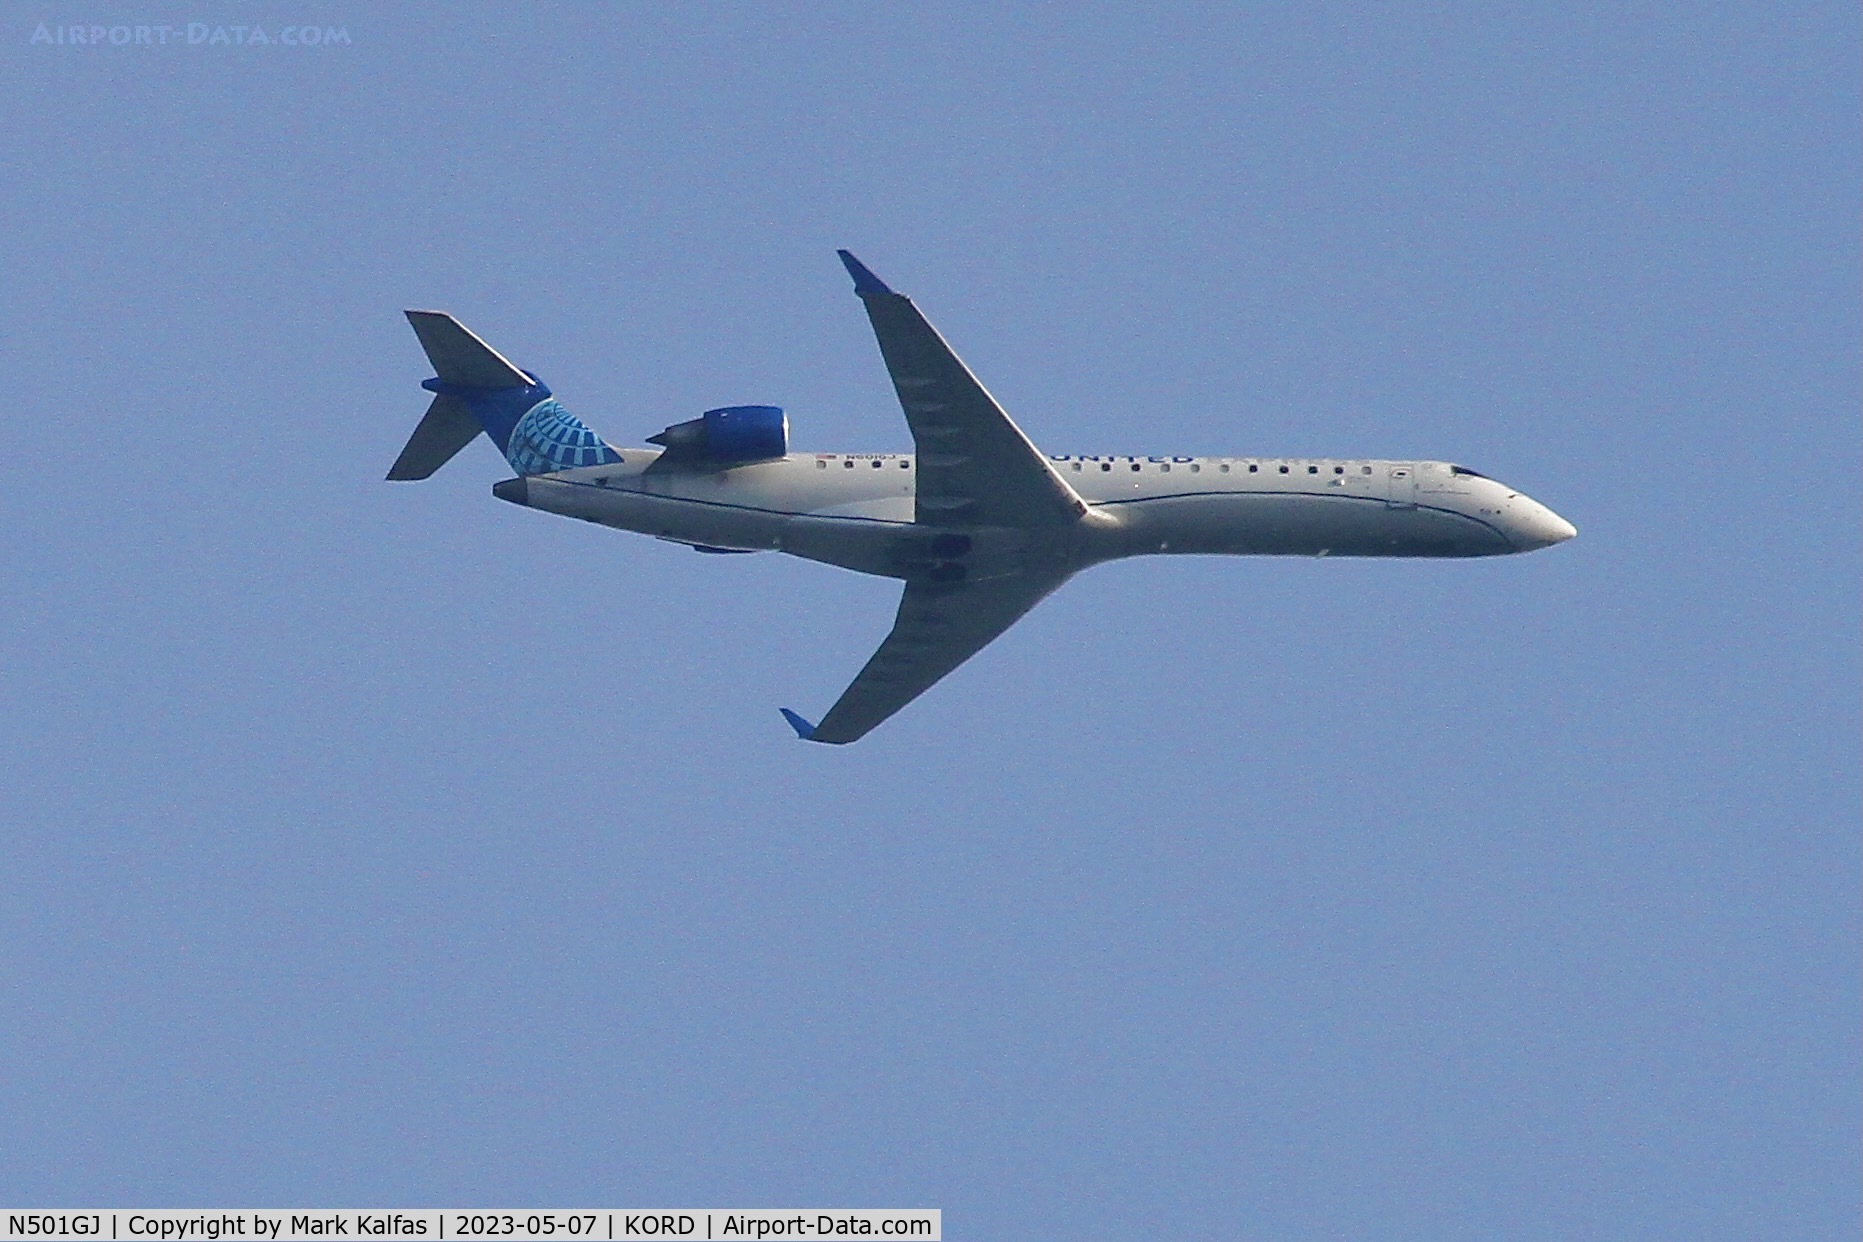 N501GJ, 2001 Bombardier CRJ-550 (CL-600-2C11) C/N 10005, GoJet/United Express N501GJ CRJ7/CRJ550, operating as GJS4423 from DCA to ORD, on approach to O'Hare.